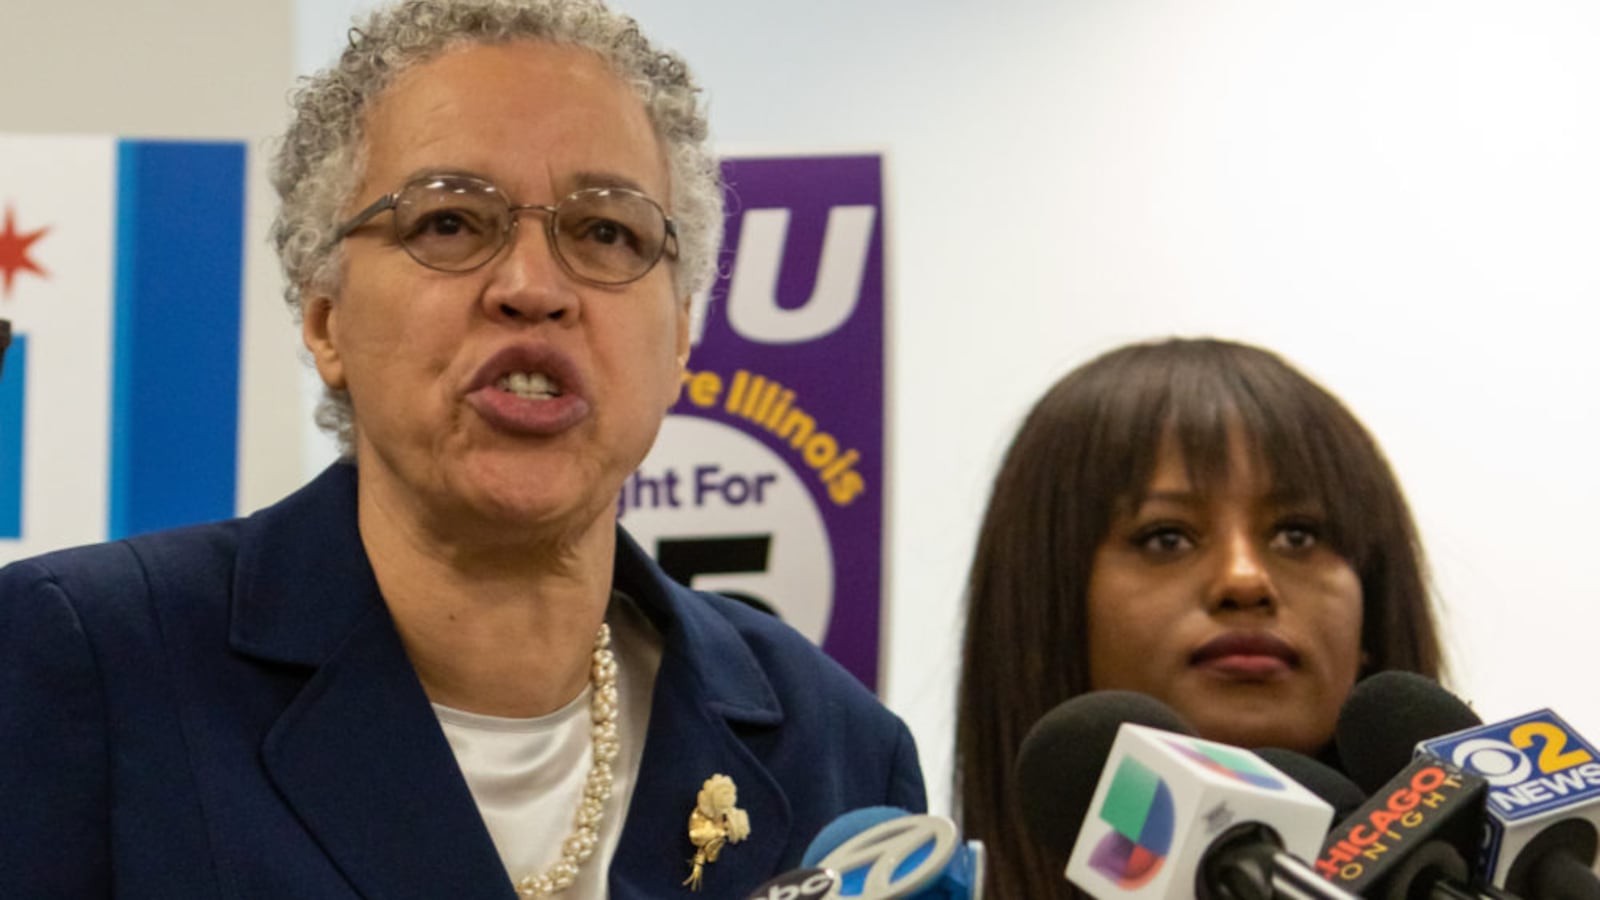 Mayoral candidate Toni Preckwinkle speaking at a press conference in December after receiving endorsements from the Chicago Teachers Union and other labor groups, including SEIU. THe woman to her right is Teachers union Vice President Stacy Davis Gates.